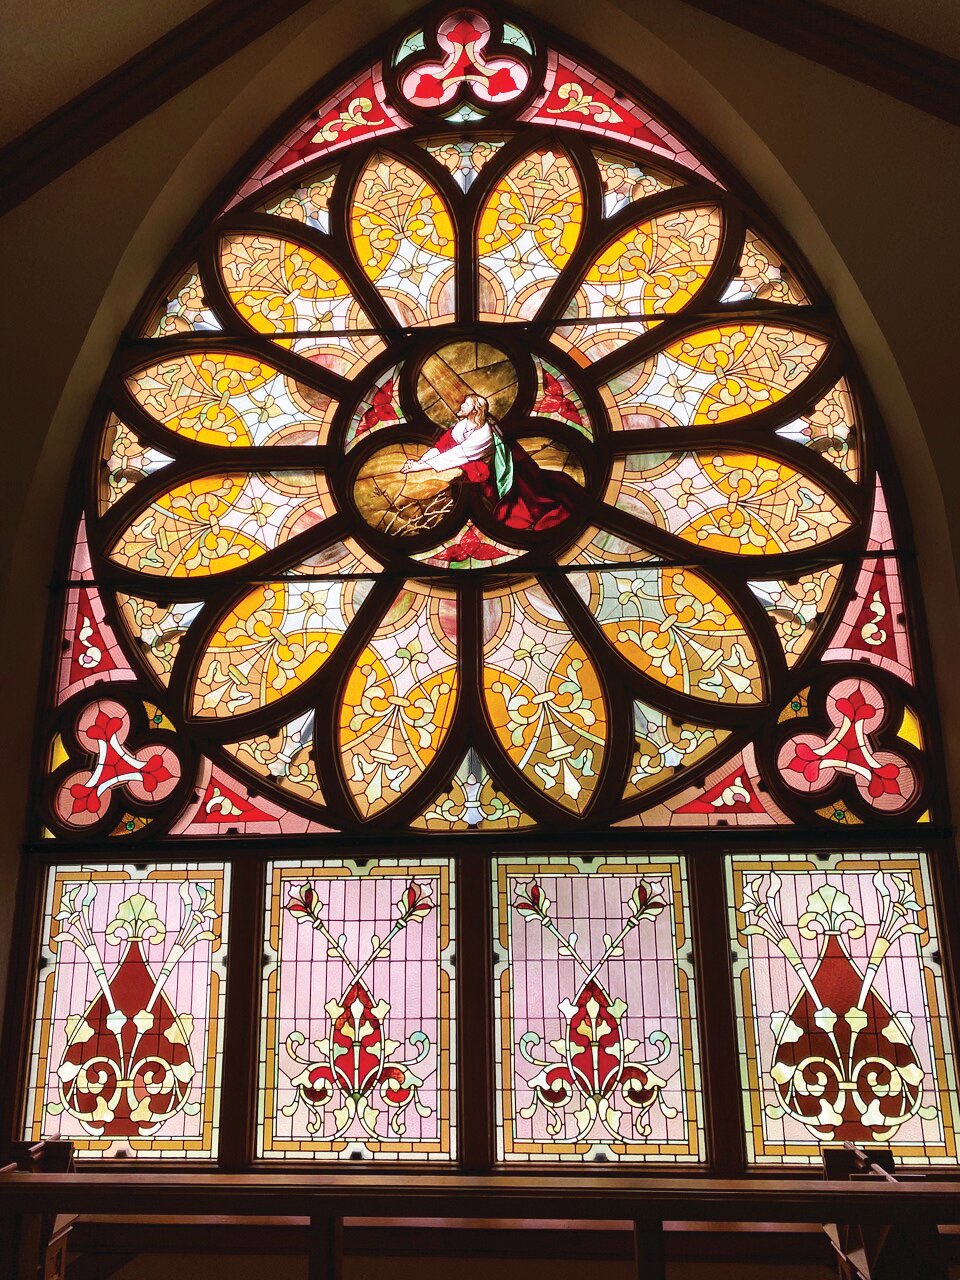 This Rose Window is original to the Methodist Church at Alexander and Court. The window was a memorial donation by the family of the late Mariah Redmon when the church was under construction in 1901. This is the third building serving the congregation, which is celebrating its bicentennial with a special service and potluck lunch May 21.